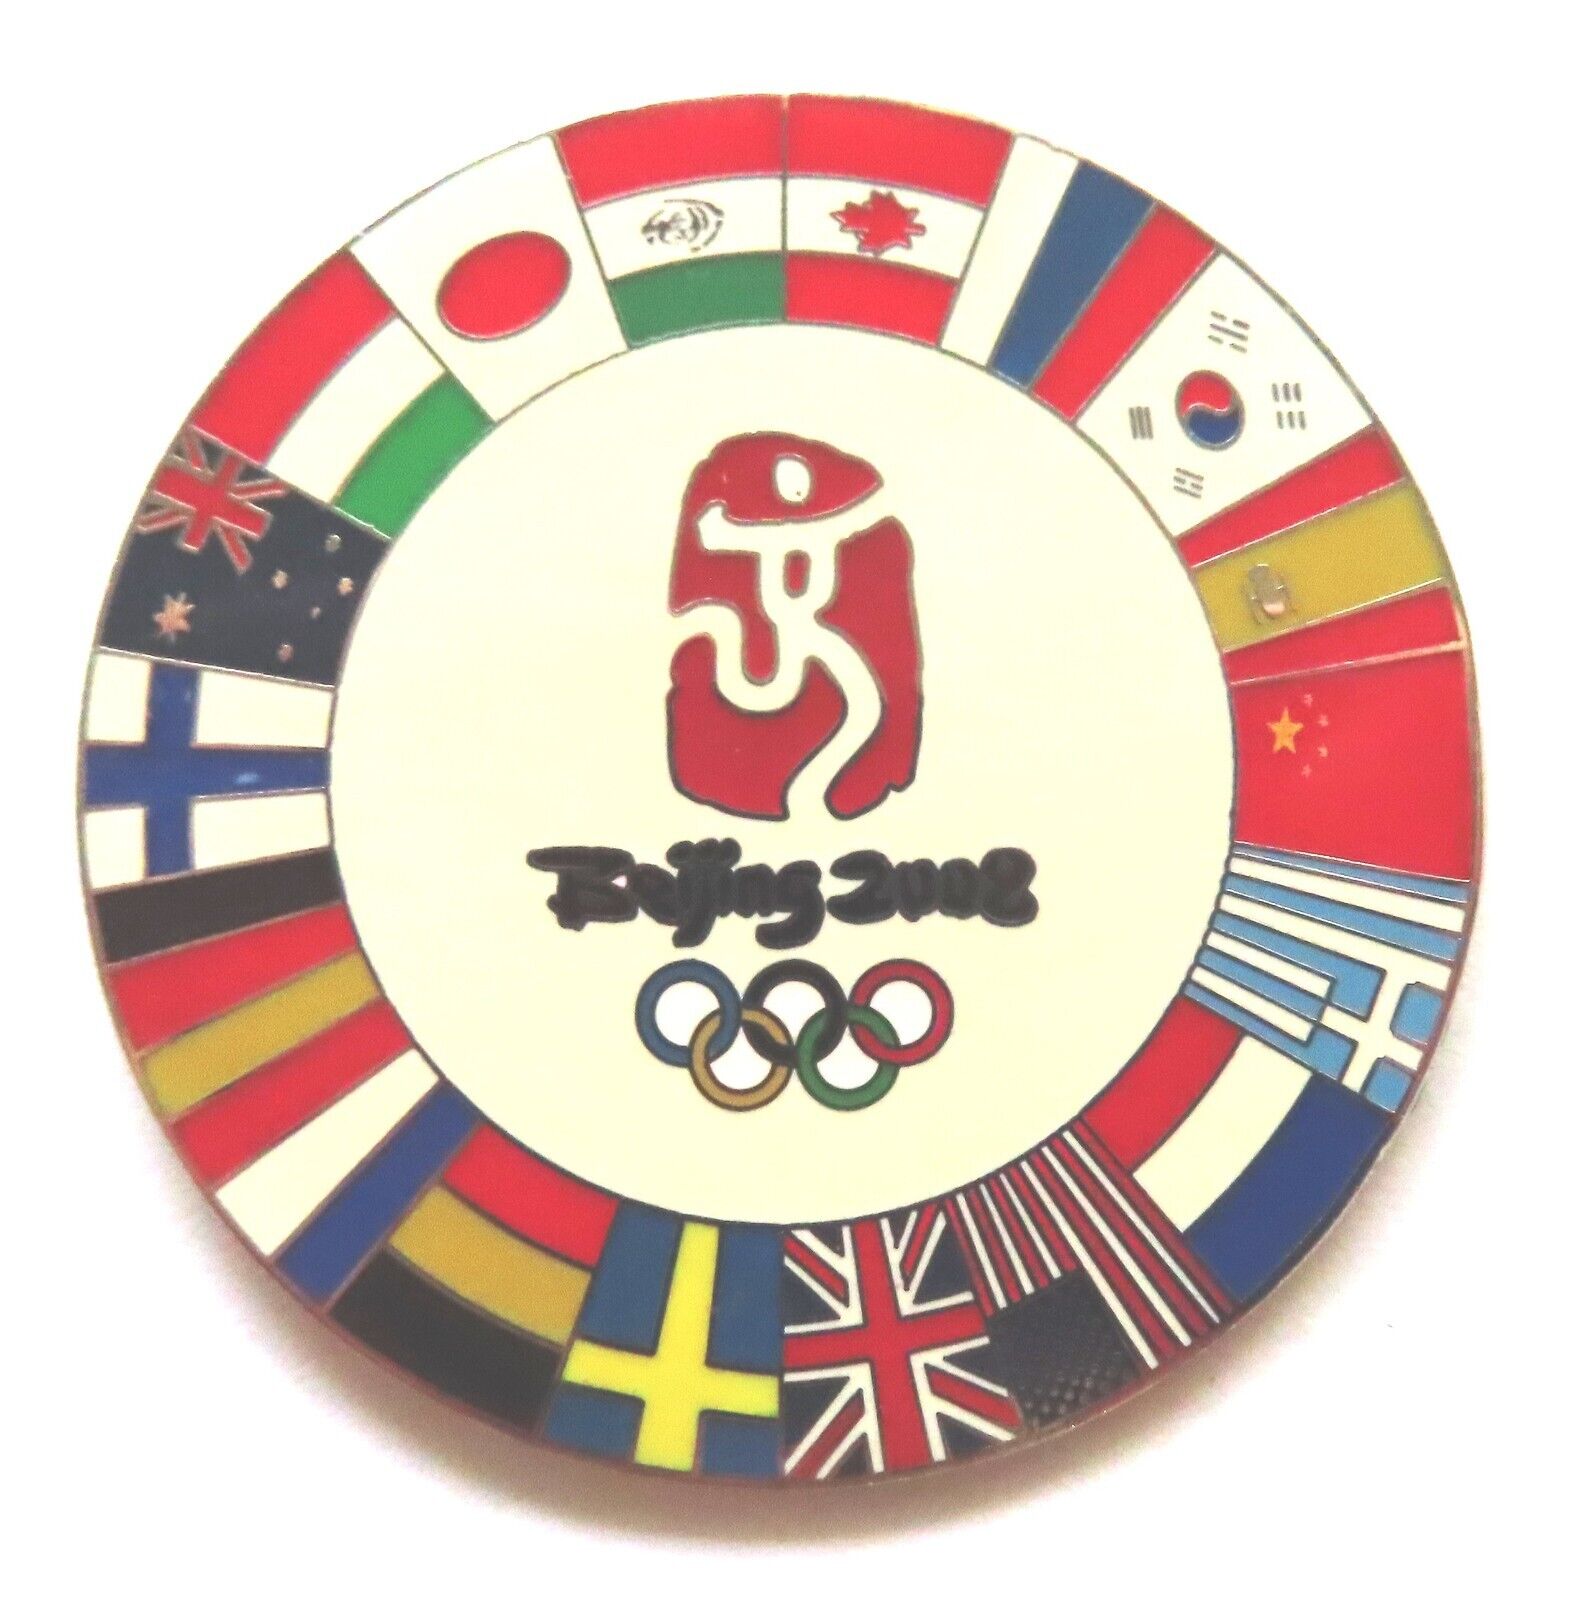 2008 Beijing Olympics pin: Official emblem surrounded by 18 national flags